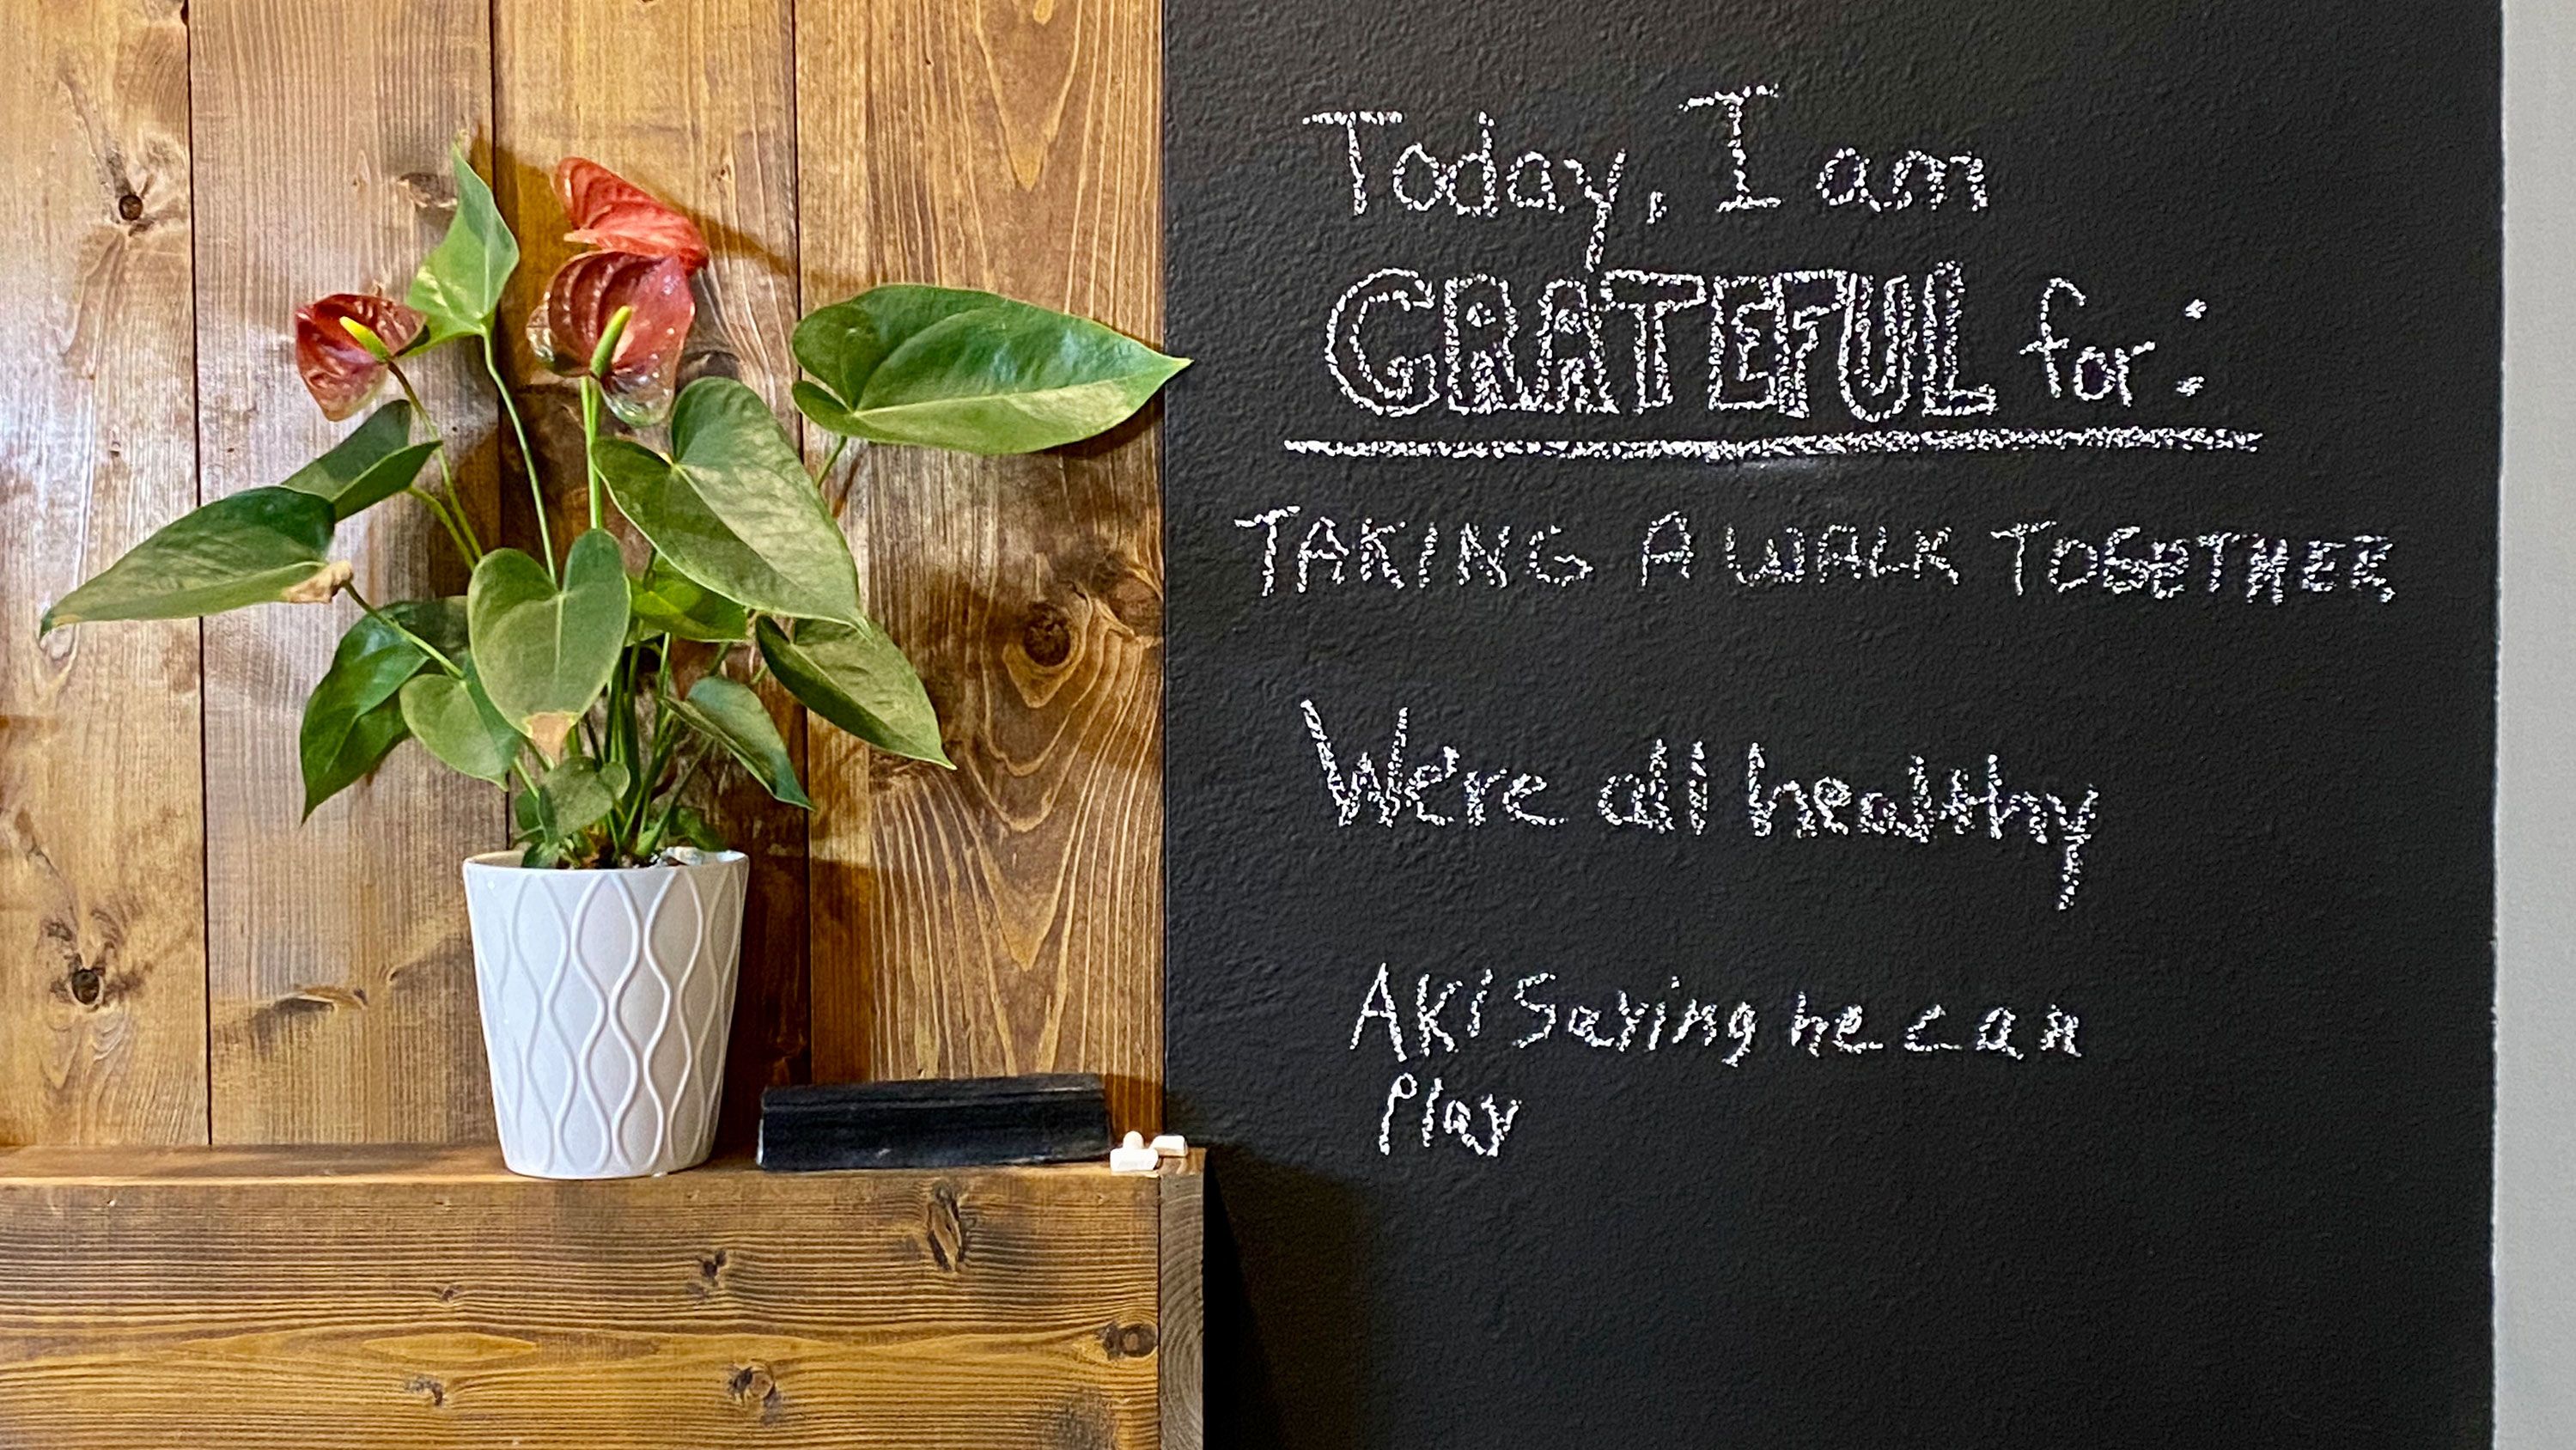 A gratitude chalkboard allows everyone to see what each member of the family appreciates.